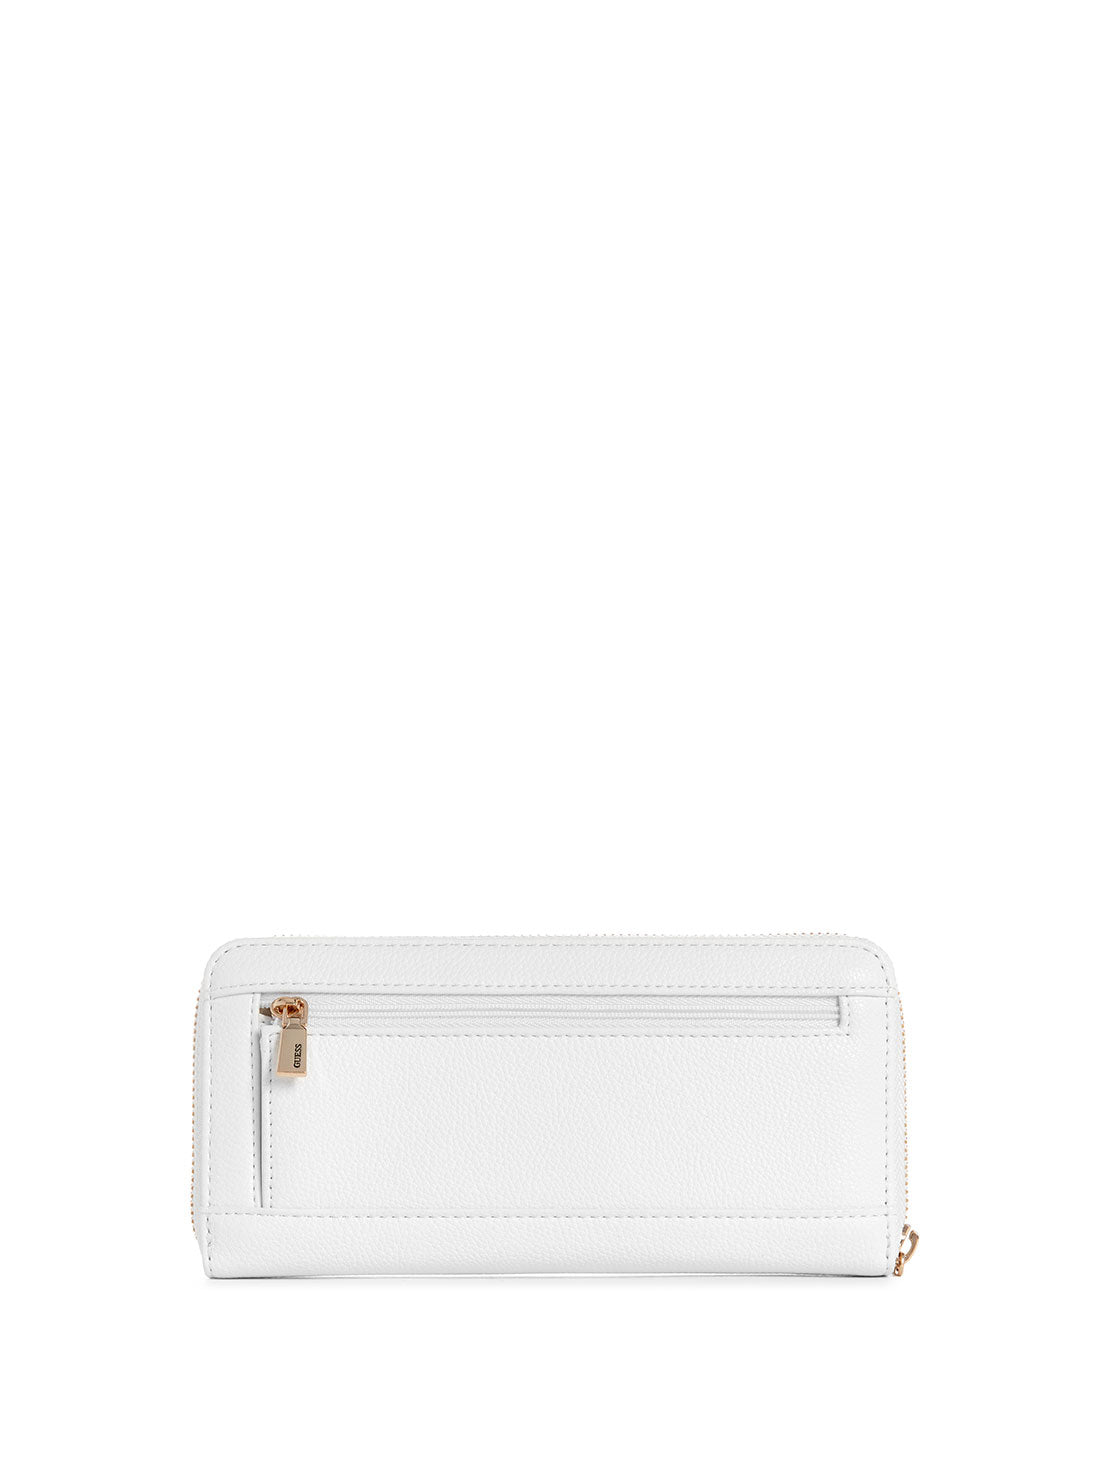 GUESS White Meridian Medium Wallet back view